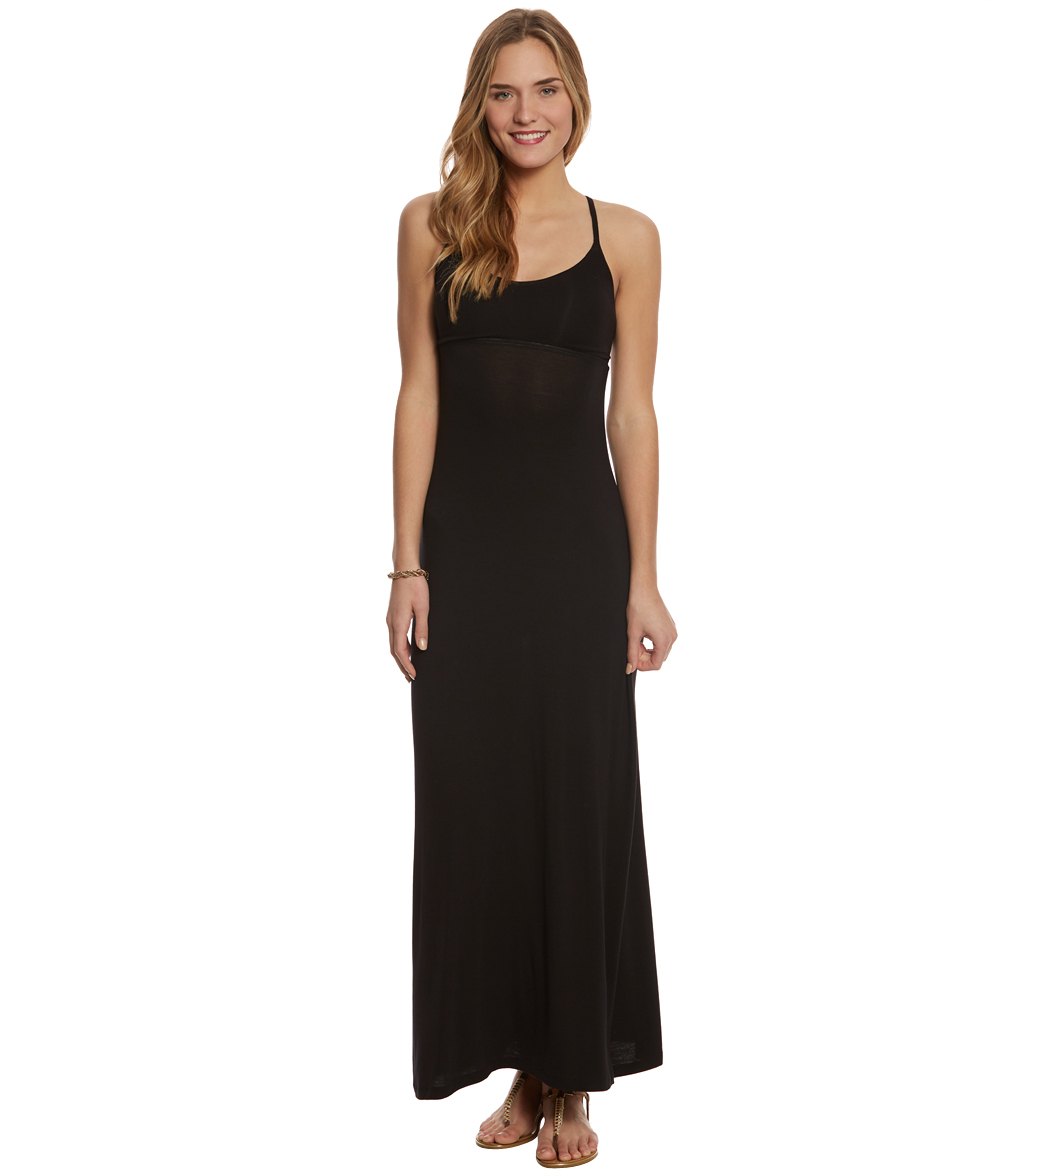 Body Glove Nerida Maxi Dress at SwimOutlet.com - Free Shipping